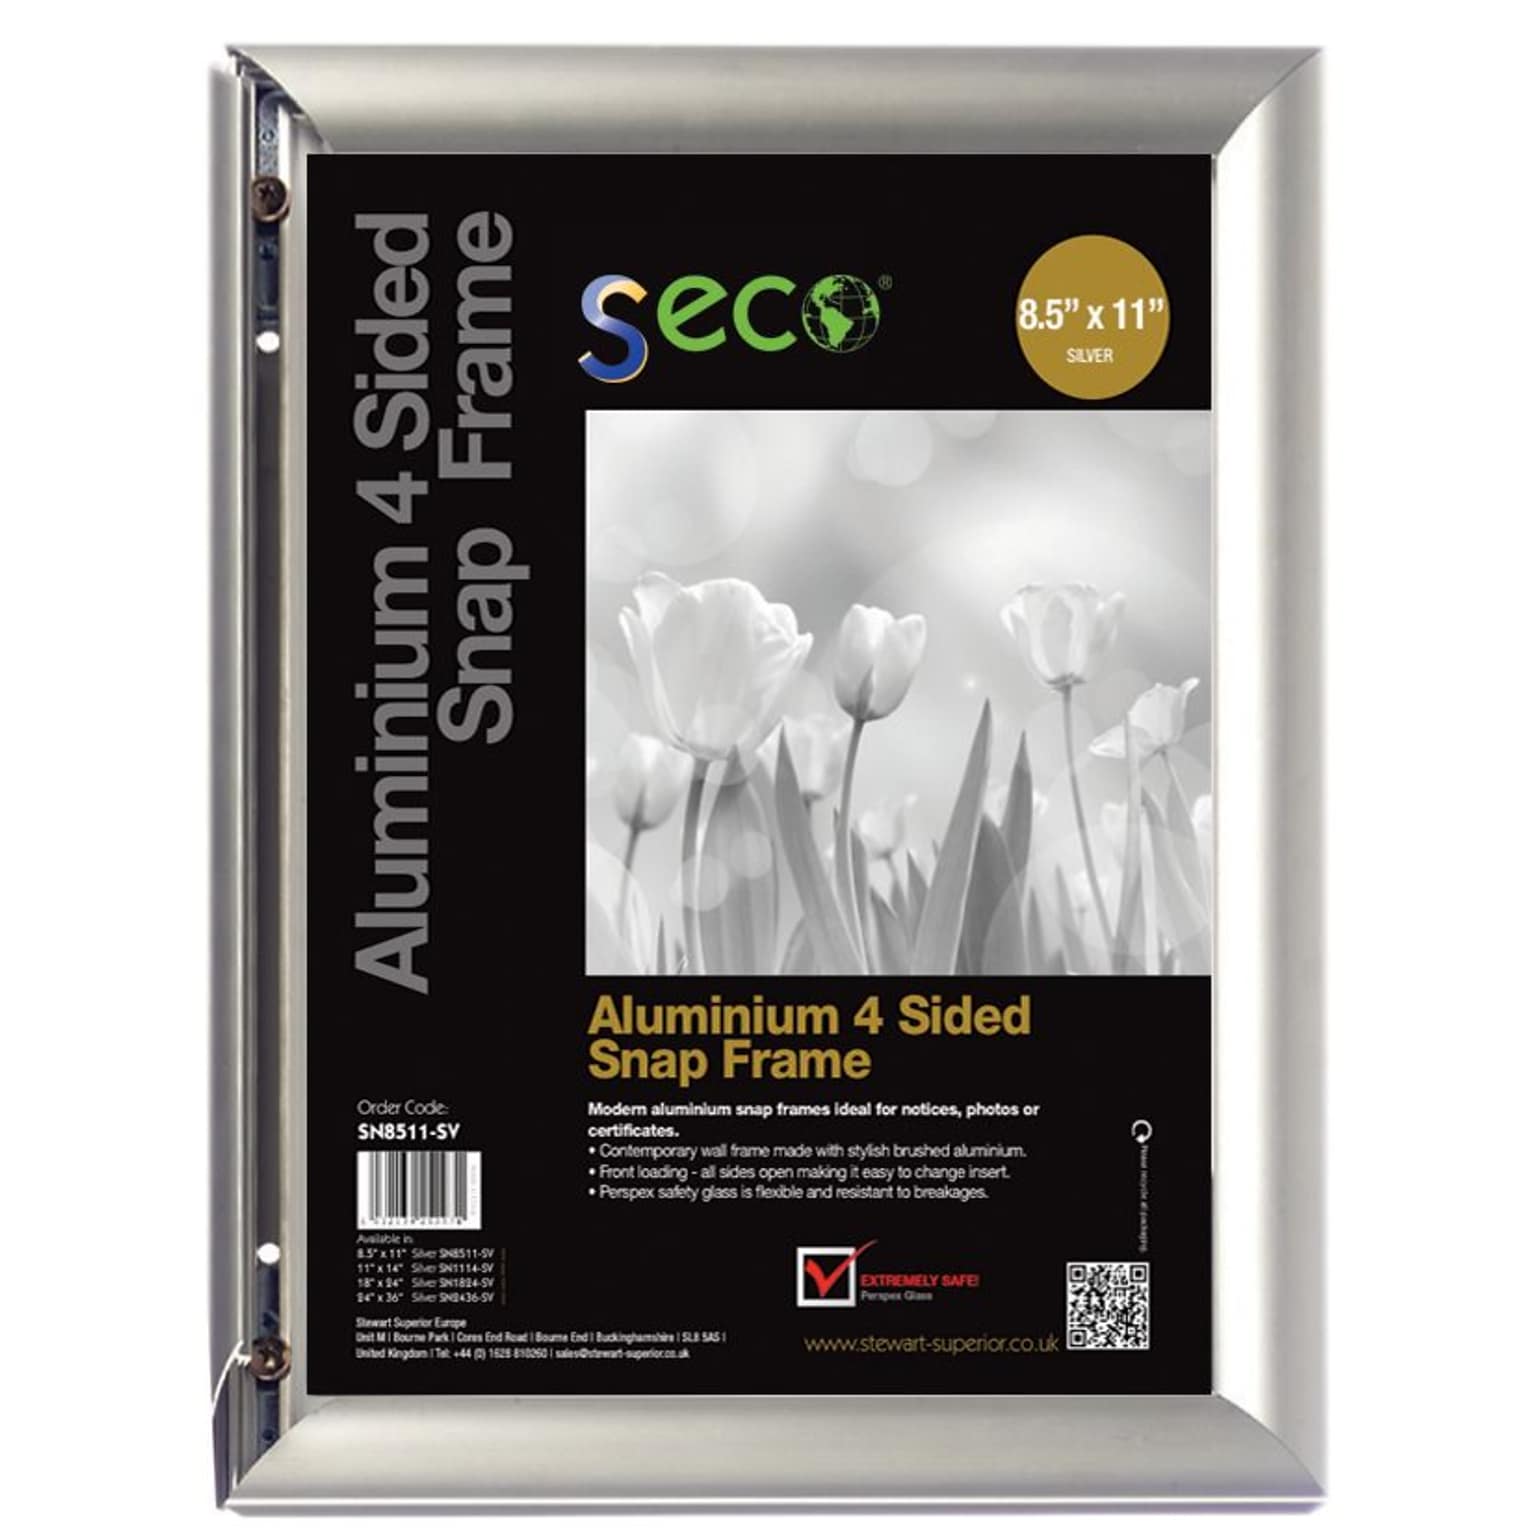 Seco Front Load Easy Open Snap Poster Frame, 8.5 x 11, Silver Anodised Aluminium (SN8511-SV)